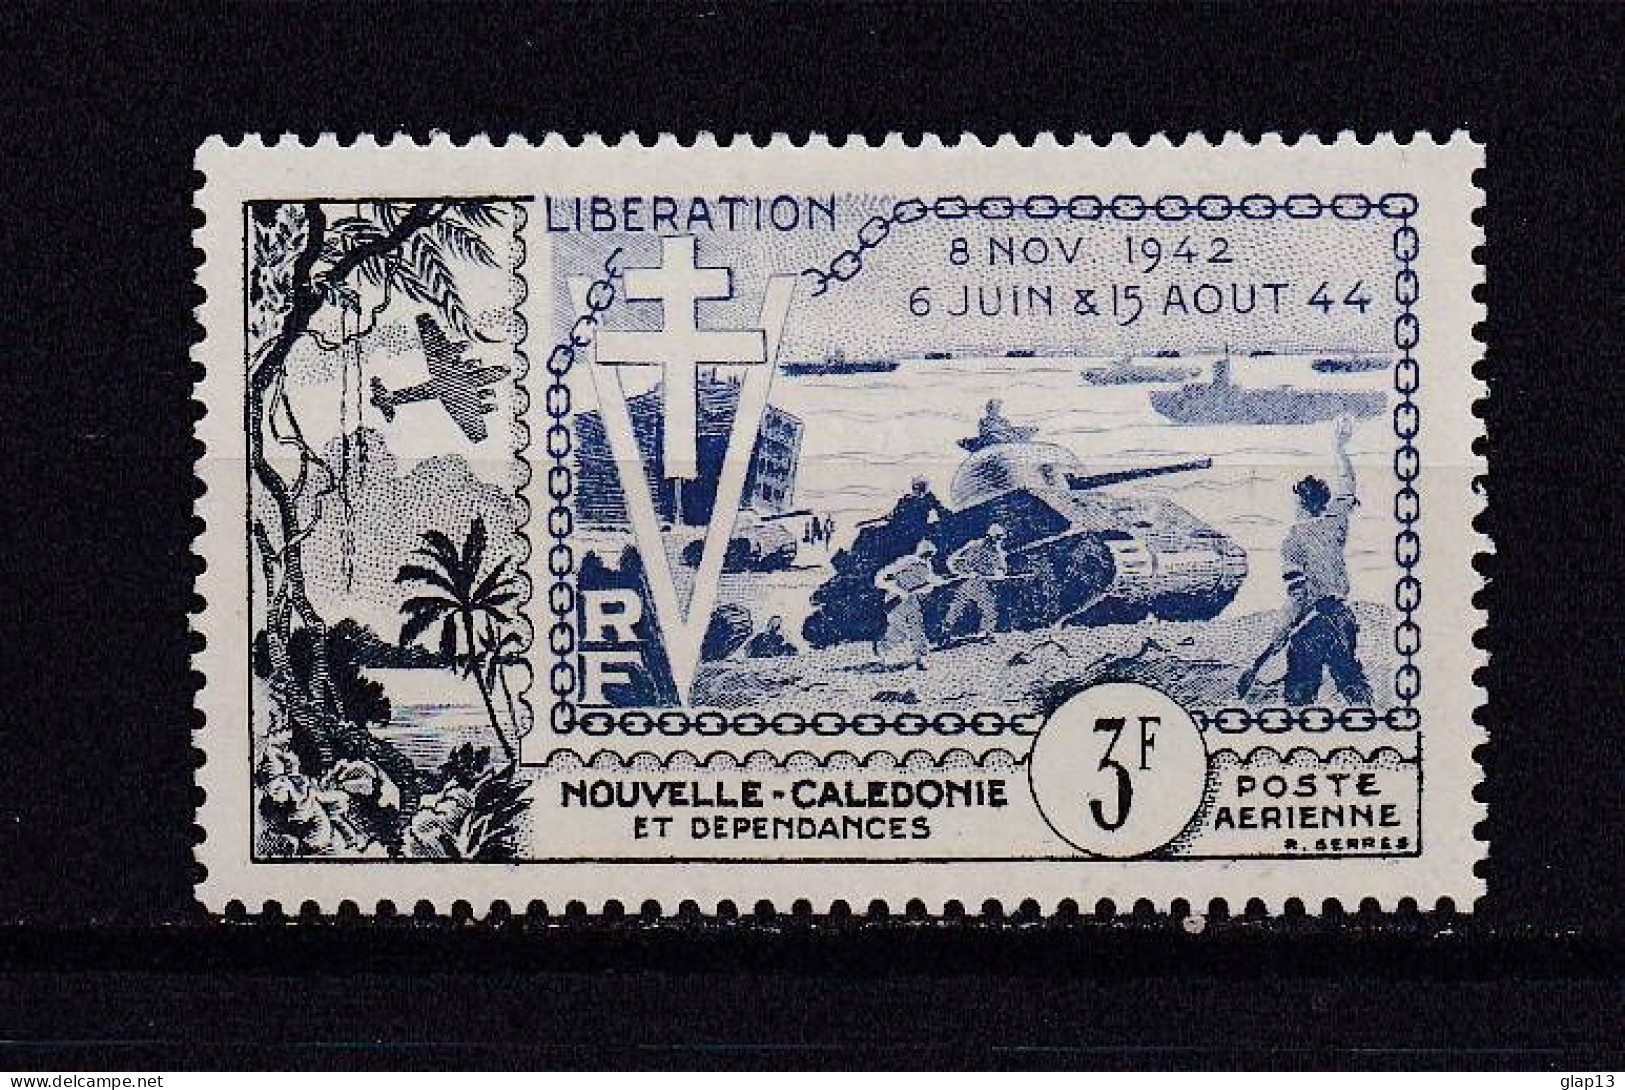 NOUVELLE-CALEDONIE 1954 PA N°65 NEUF AVEC CHARNIERE LIBERATION - Neufs